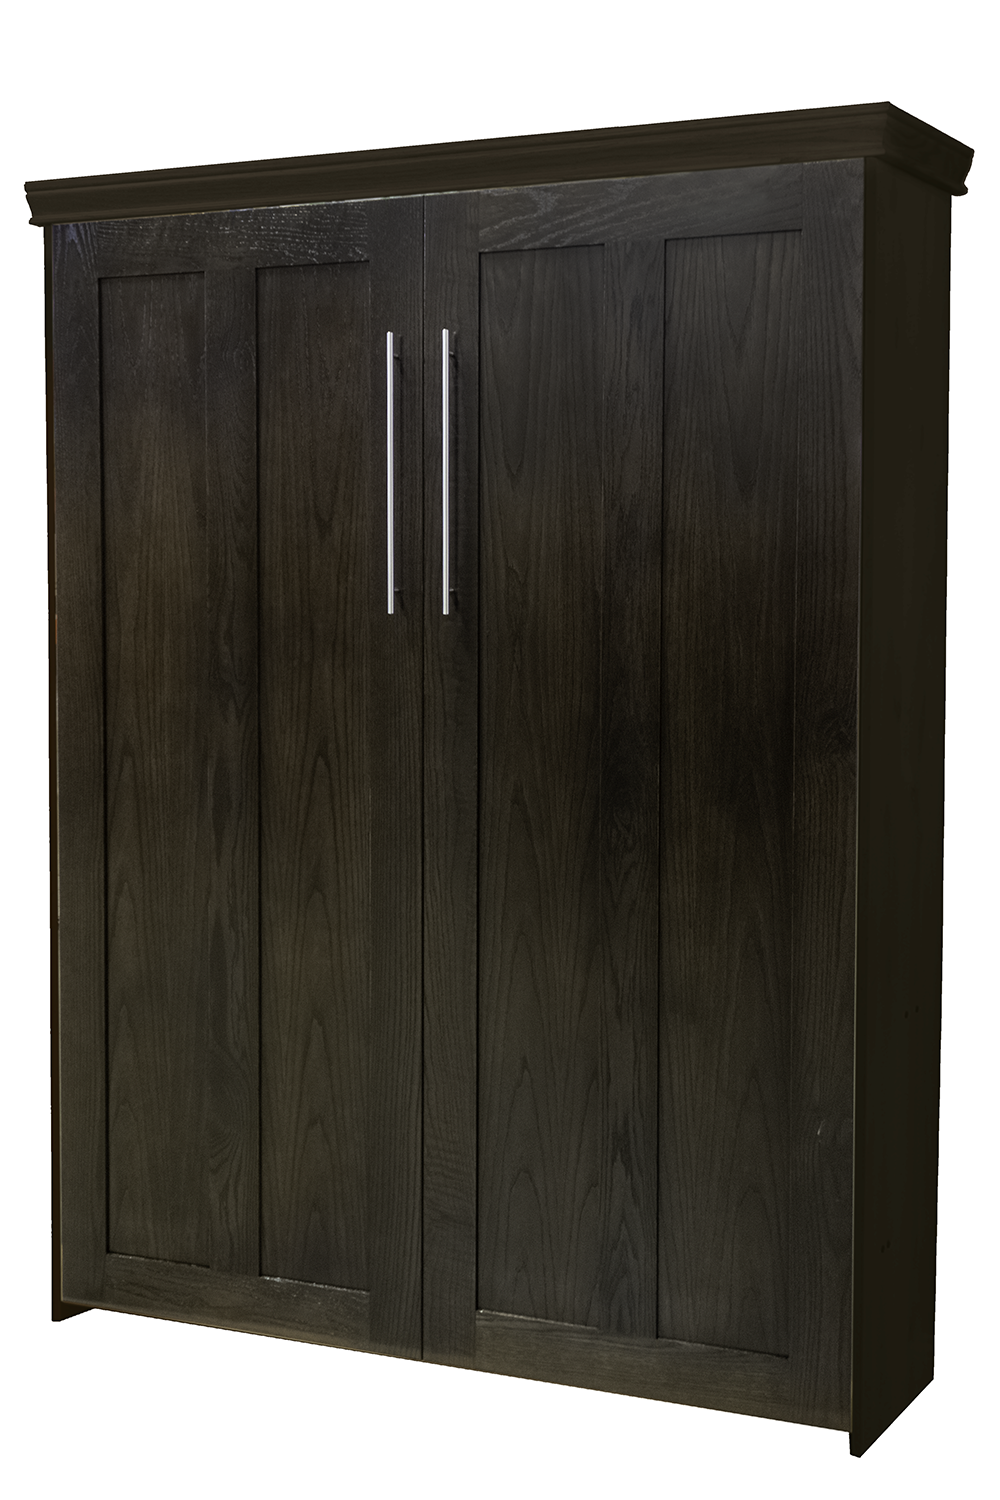 CONTEMPORARY FACE MURPHY BED VERTICAL QUEEN OAK ESPRESSO STAIN DISCOUNTED